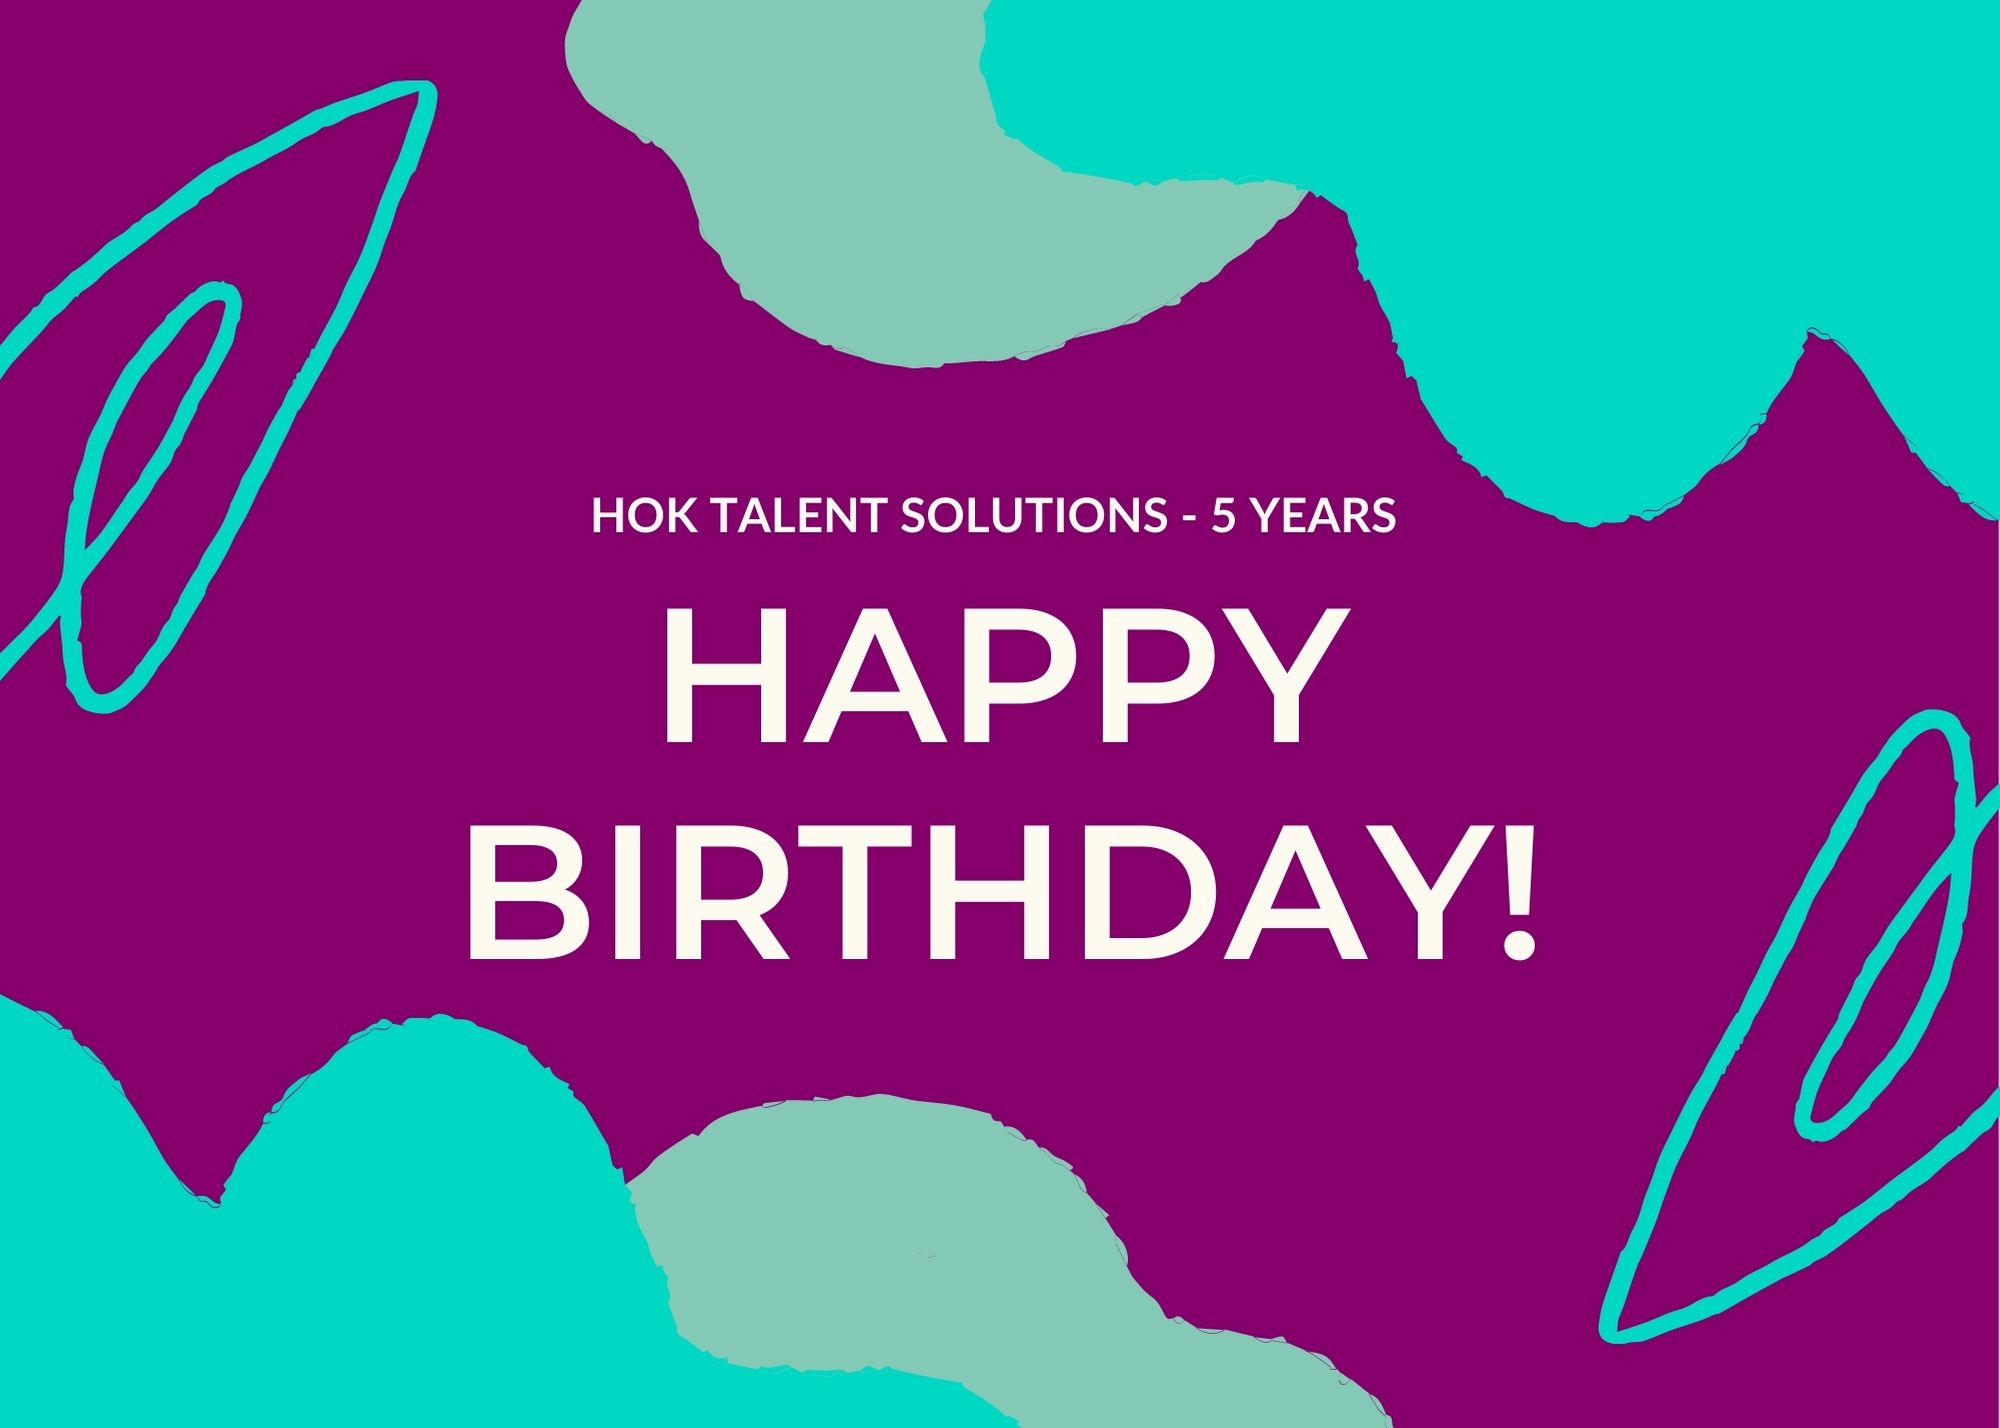 HOK-Talent-Solutions-5-Years